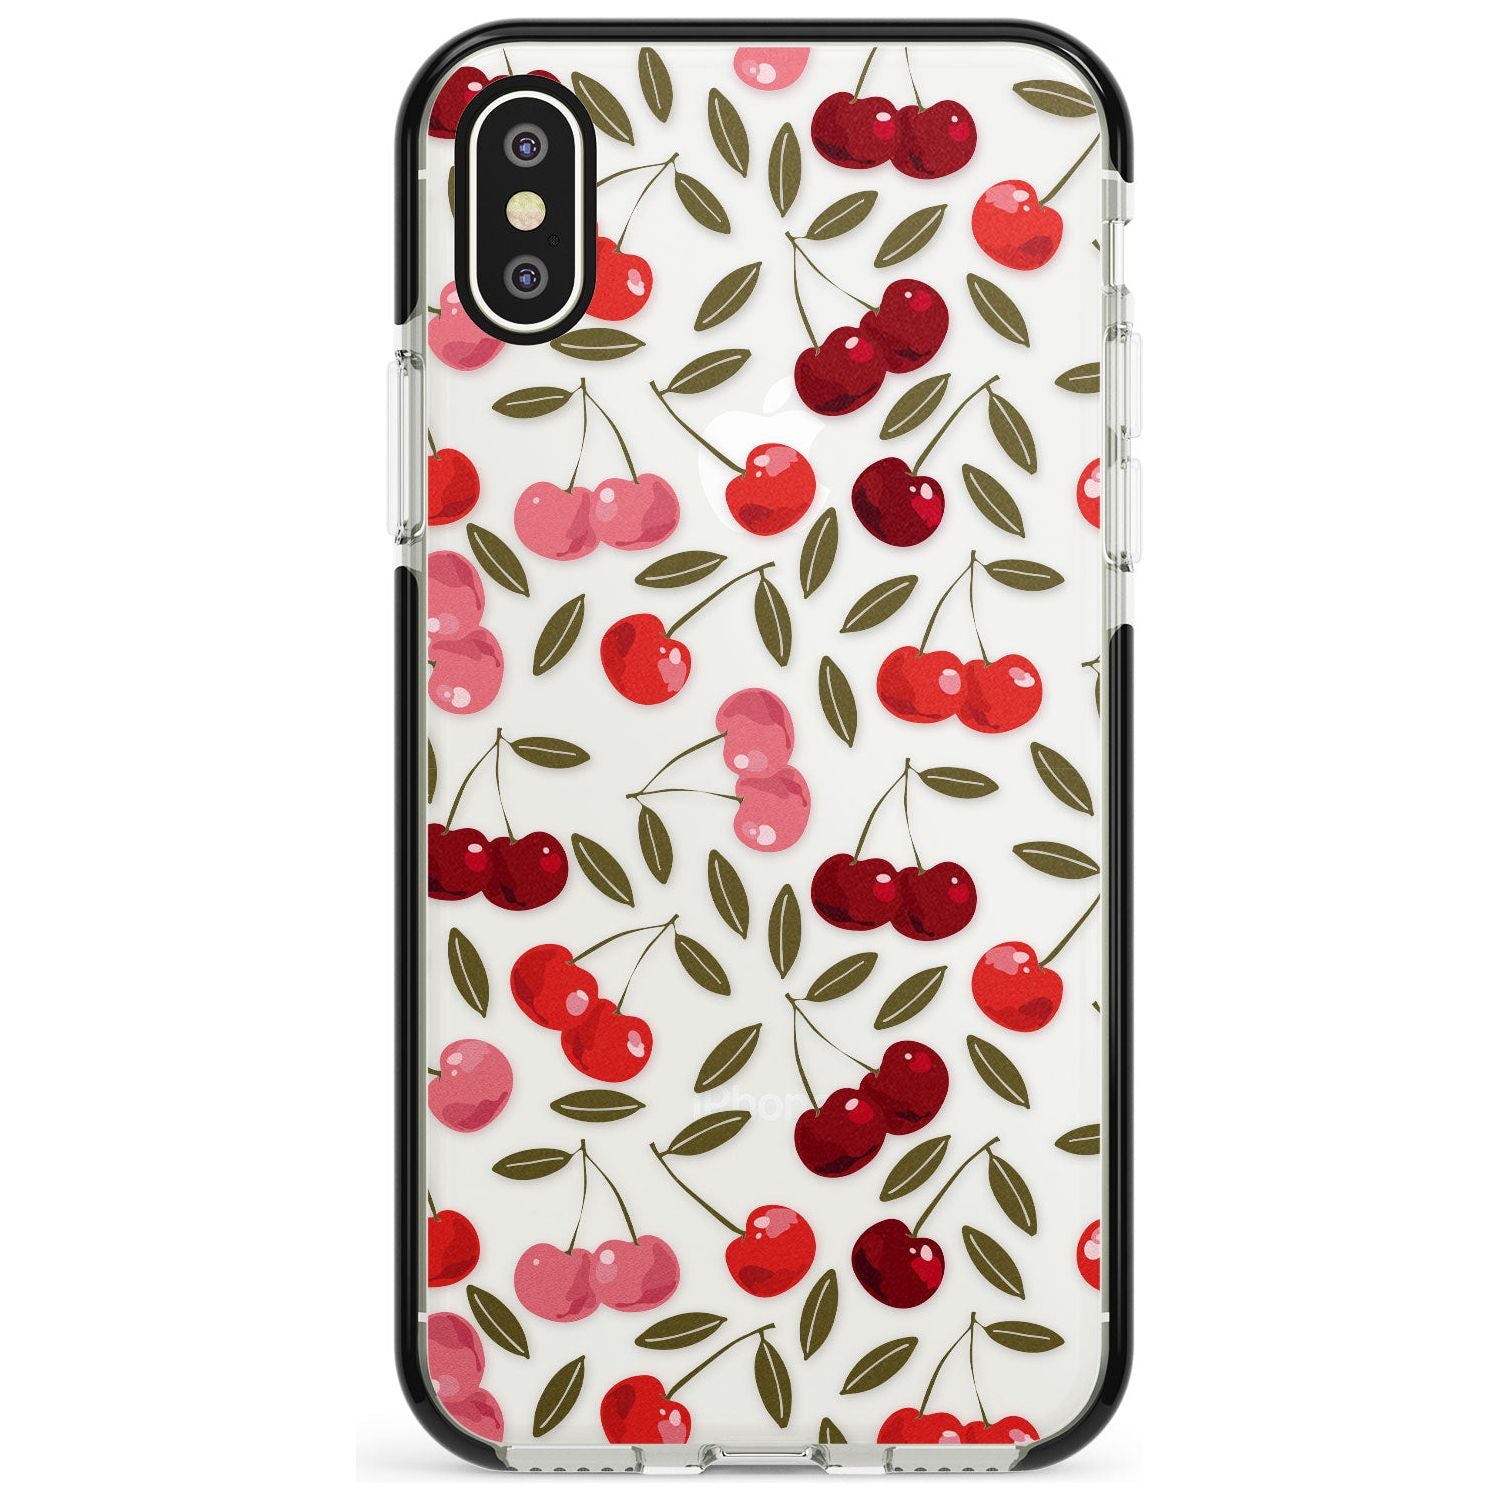 Cherry on top Black Impact Phone Case for iPhone X XS Max XR